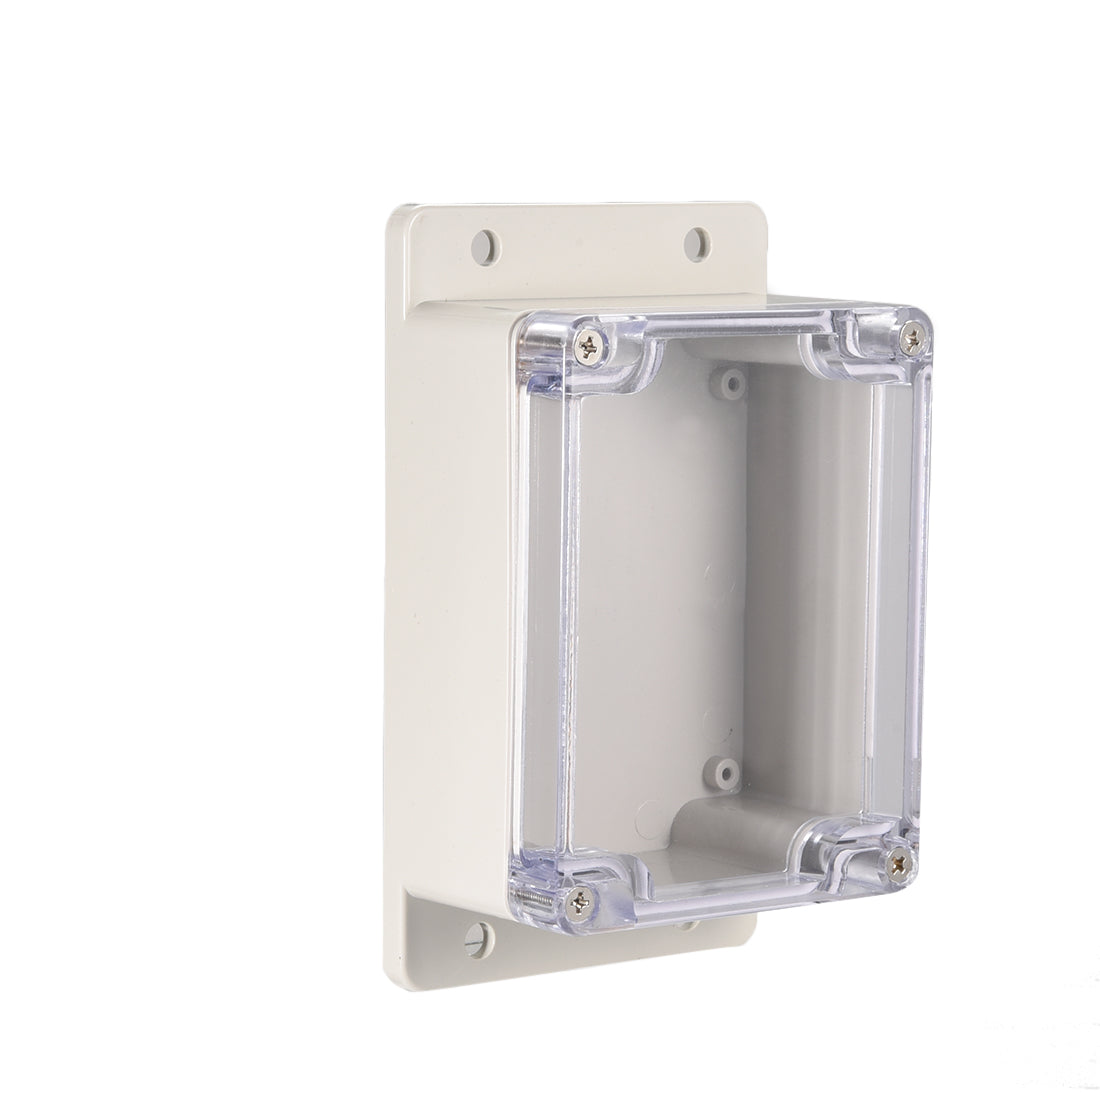 uxcell Uxcell 115mmx90mmx56mm(4.5"x3.5"x2.2") ABS Junction Box Universal Project Enclosure w PC Transparent Cover